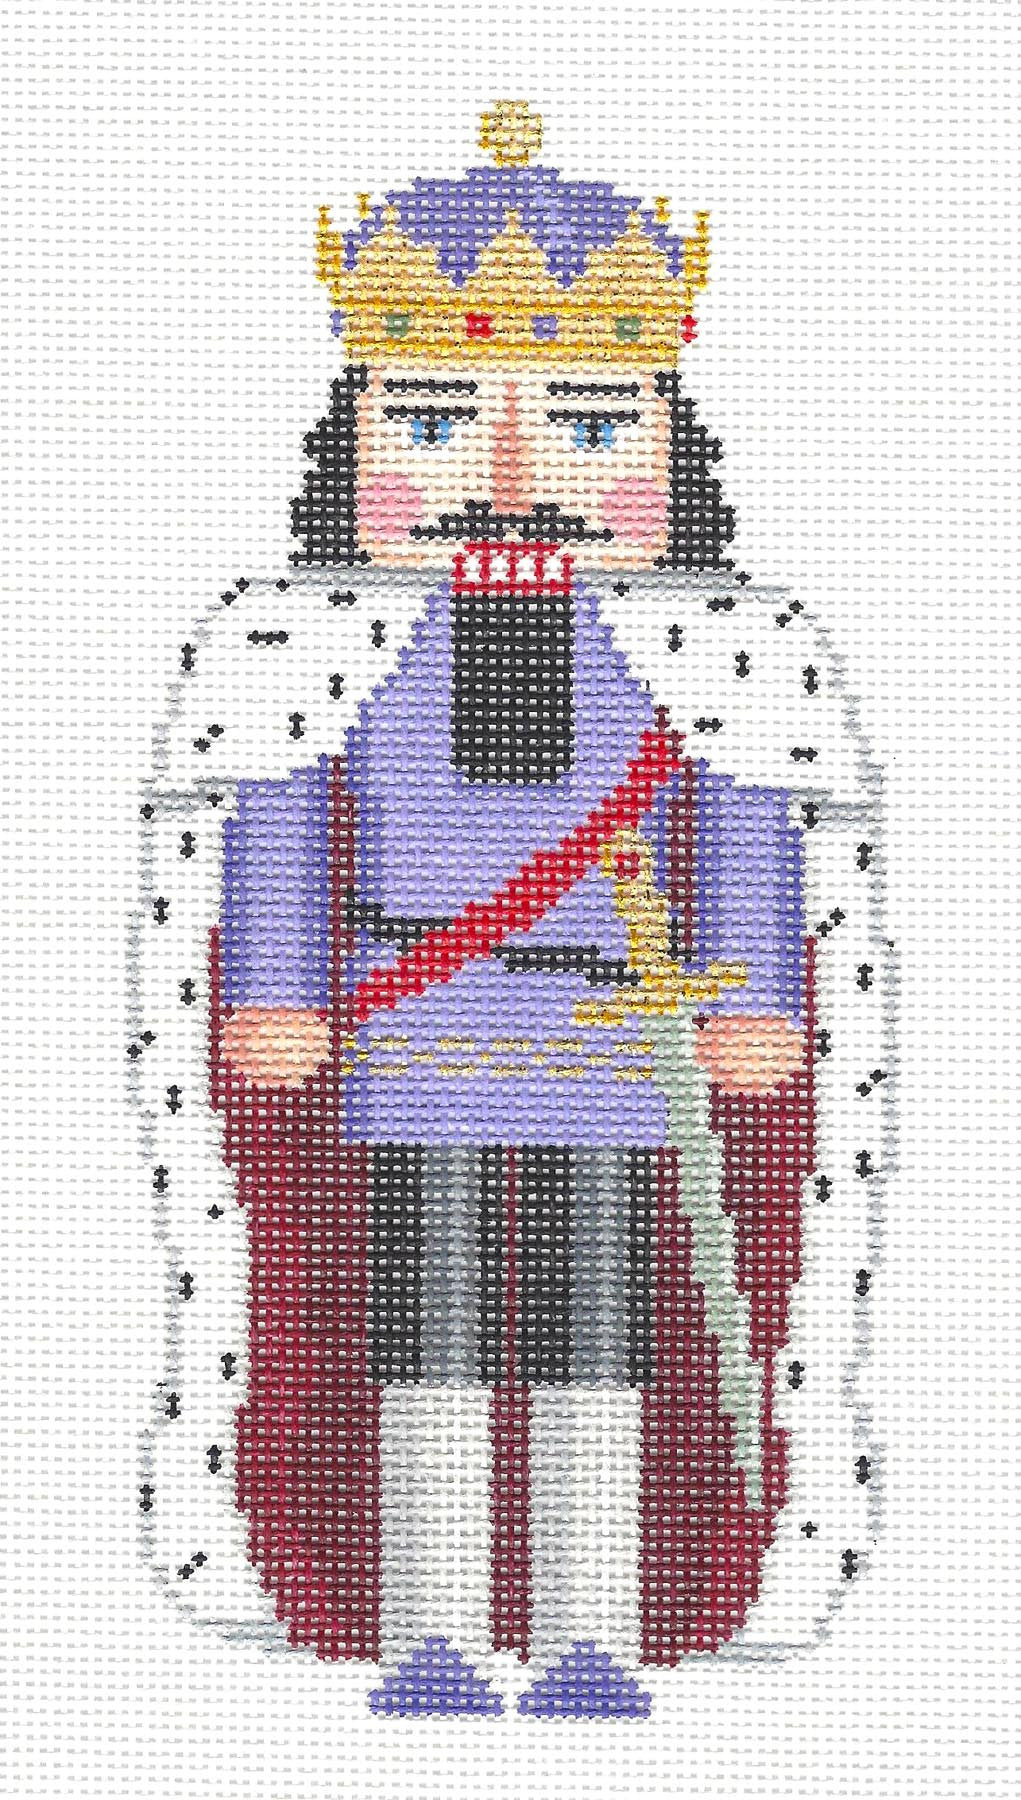 Nutcracker~King Arthur Ornament handpainted Needlepoint Canvas~by Susan Roberts *MAY NEED TO BE SPECIAL ORDERED*